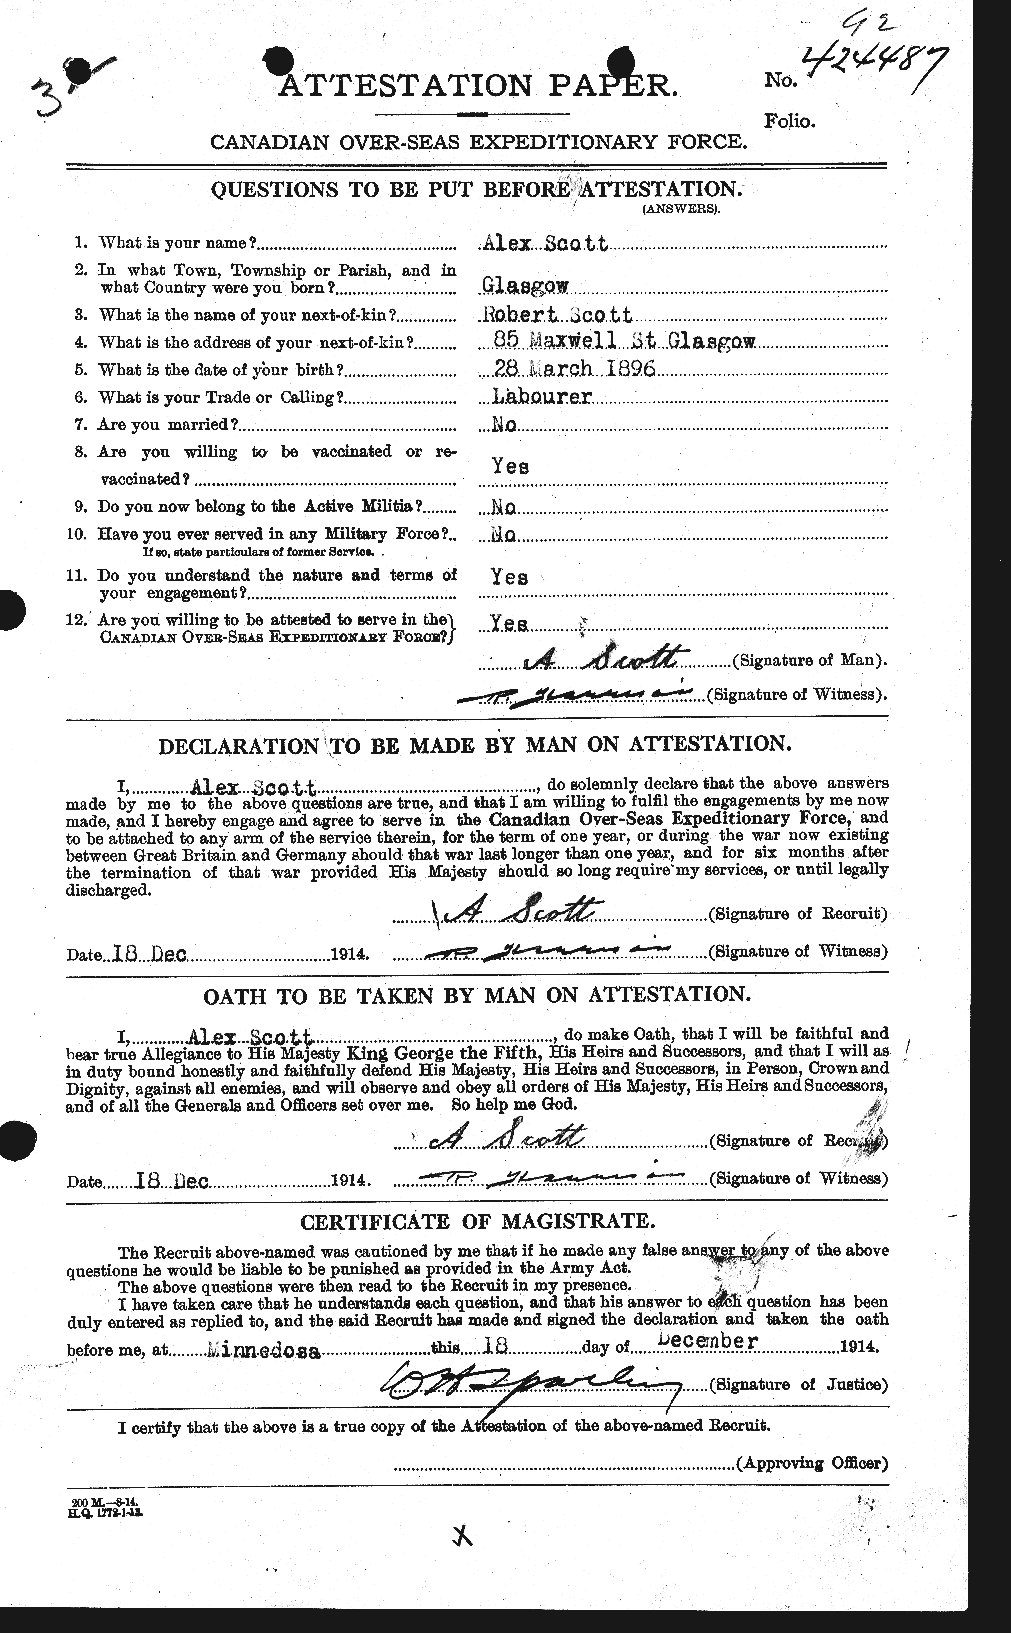 Personnel Records of the First World War - CEF 086838a